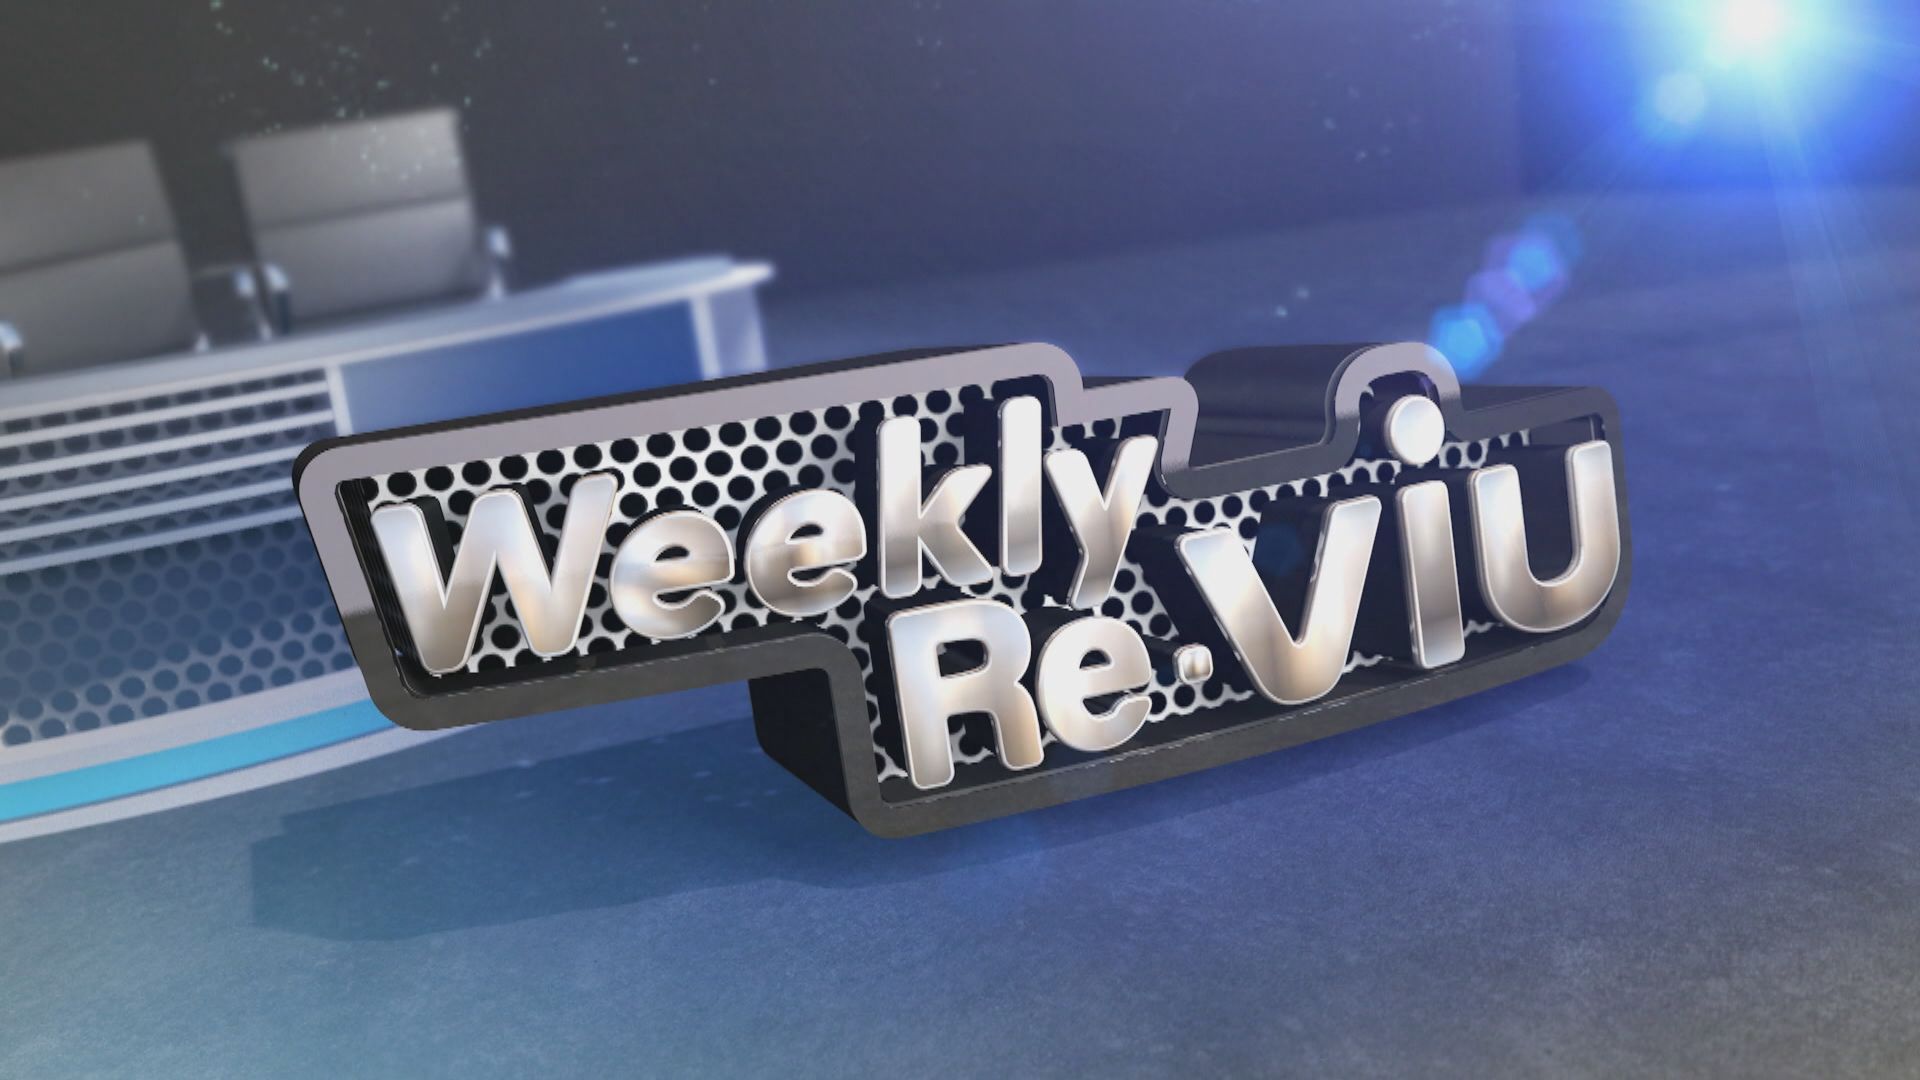 Weekly ReViu | Part Two - Story Roundup (3.6.2023)